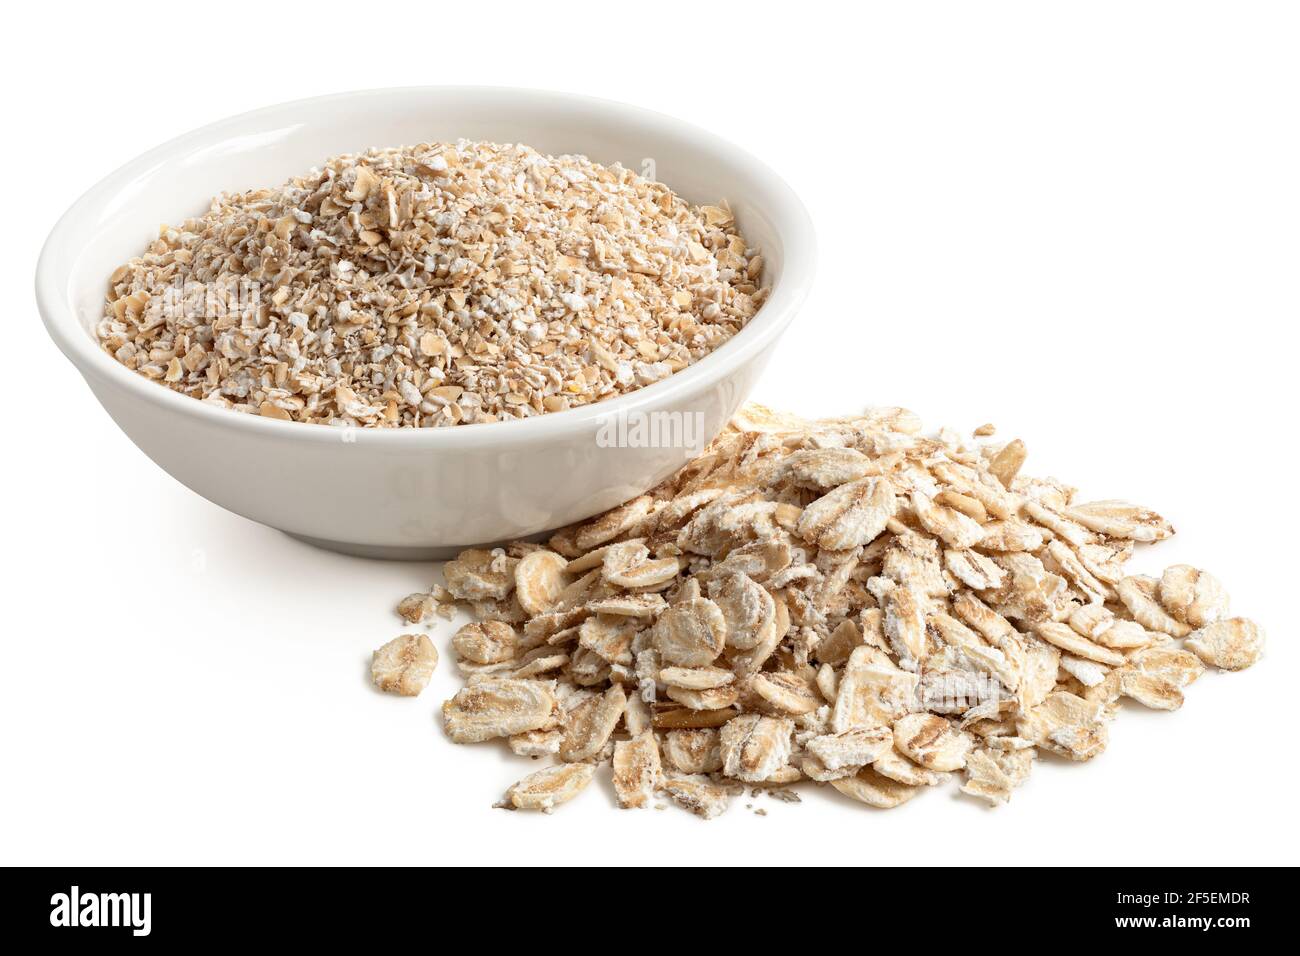 Uncooked coarse oatmeal in a white ceramic bowl next to a pile of uncooked porridge oats isolated on white. Stock Photo